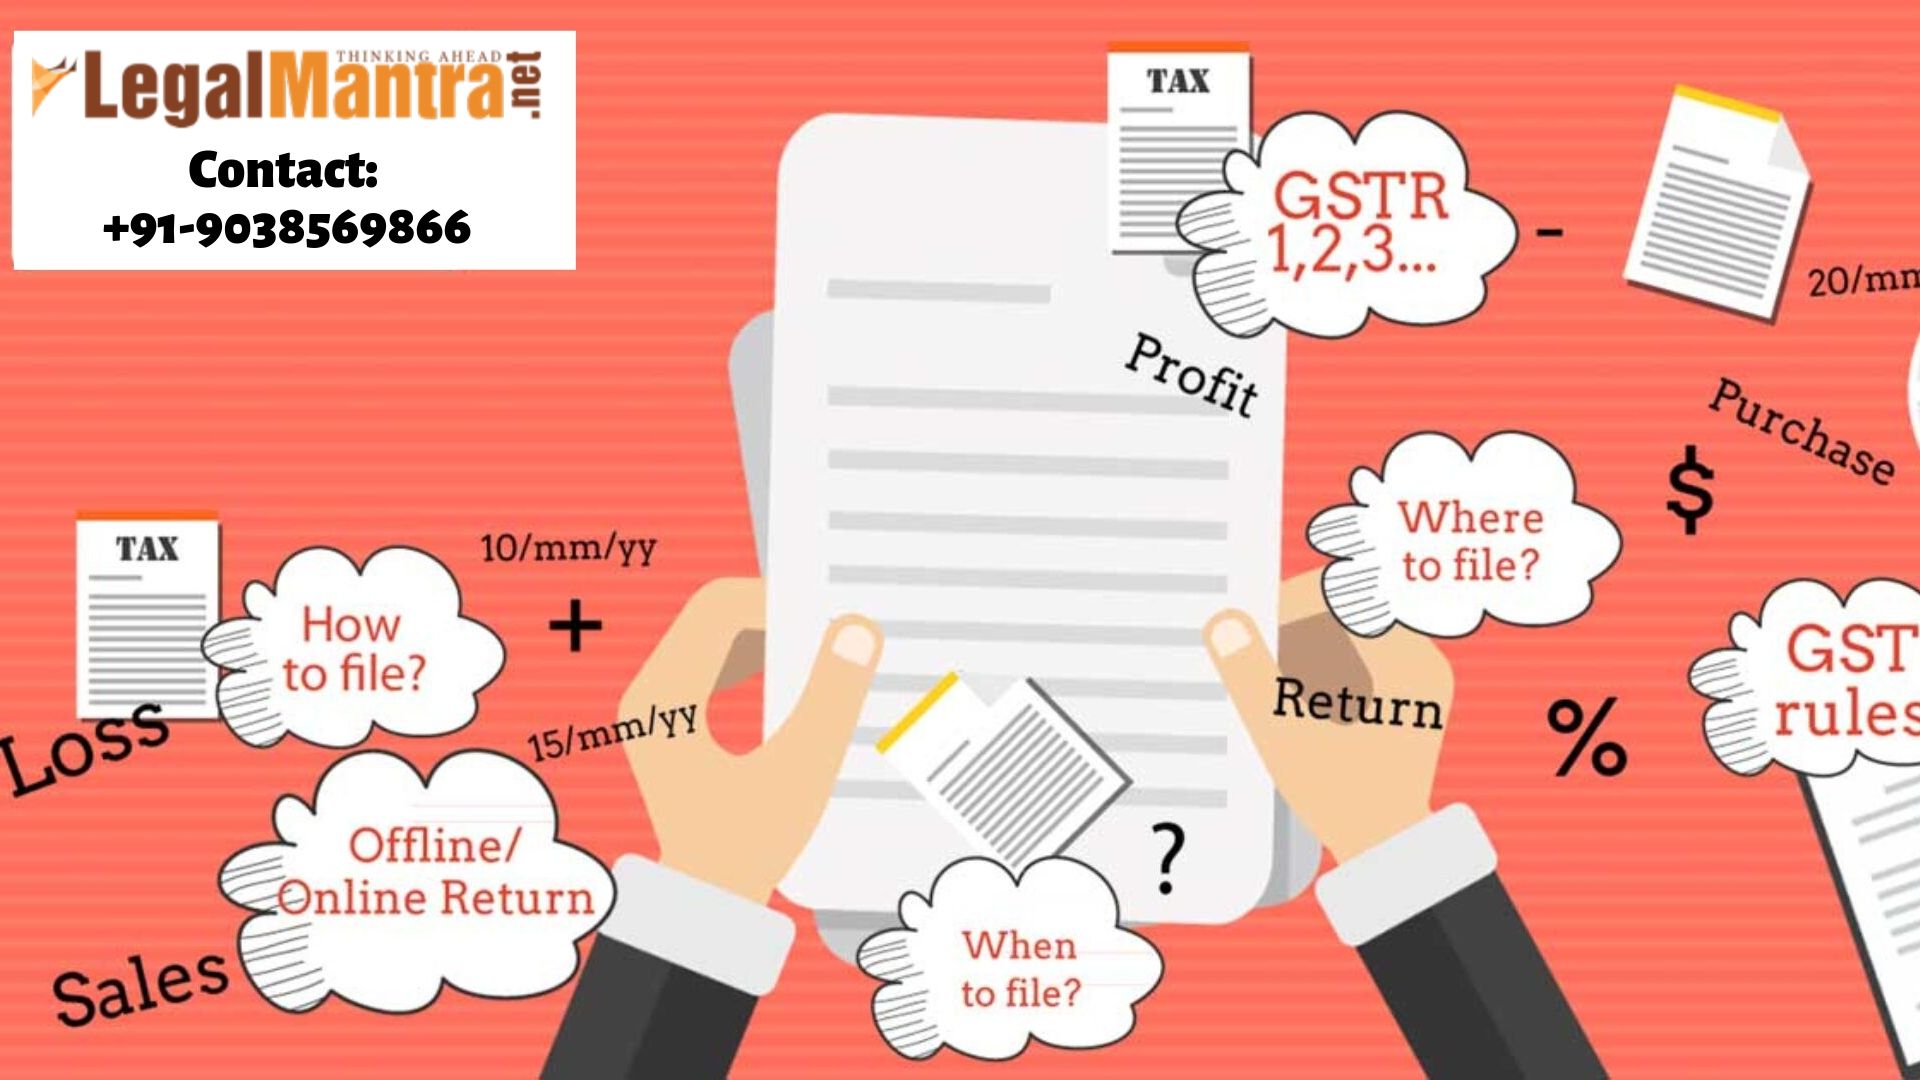 Trial Run of Offline Tool of New Return of GST, for Familiarisation & Feedback by the Taxpayers